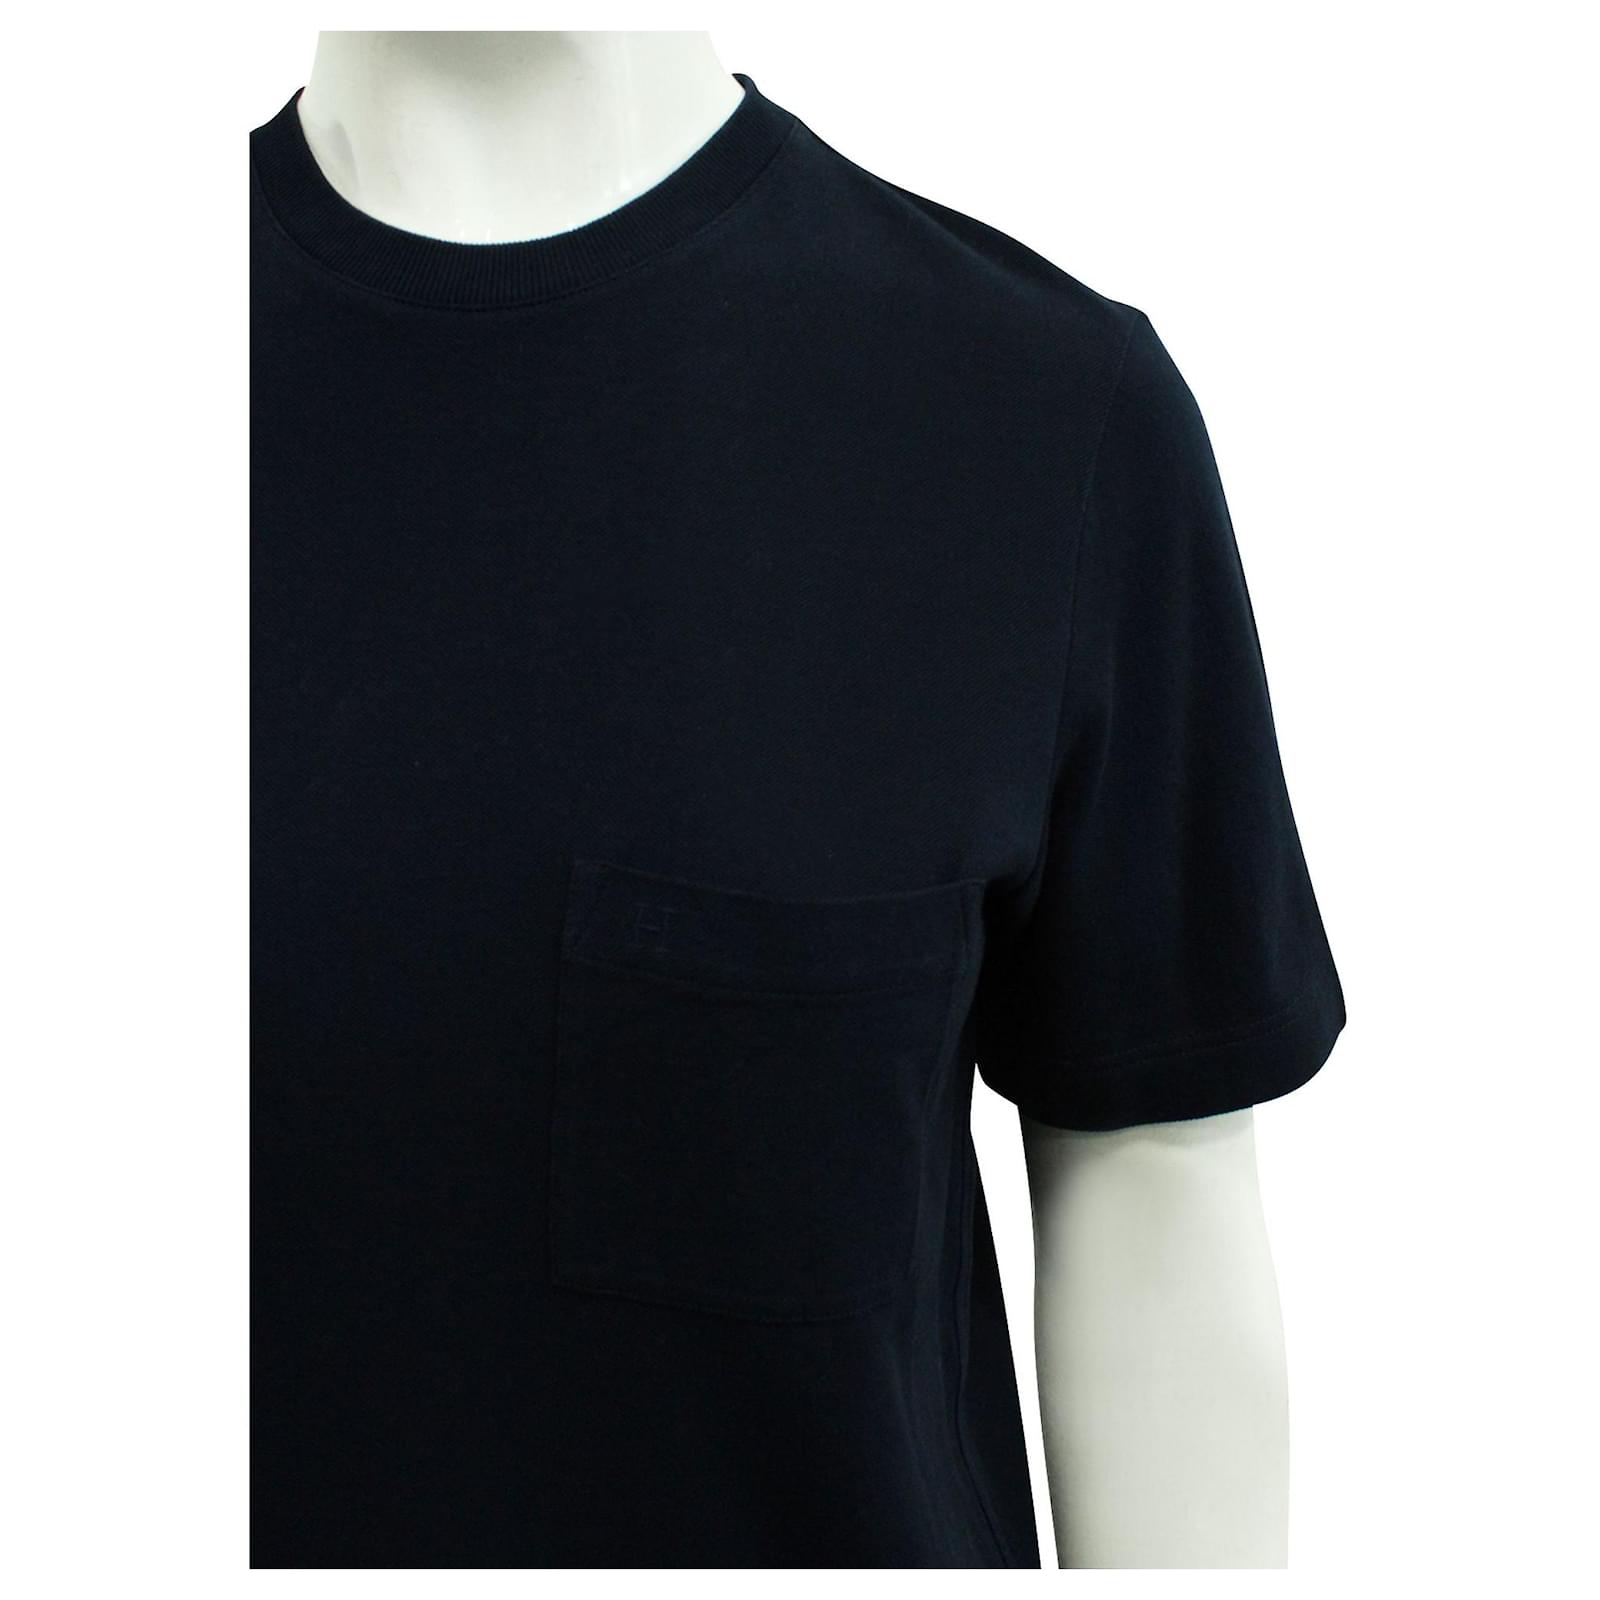 H embroidered T-shirt